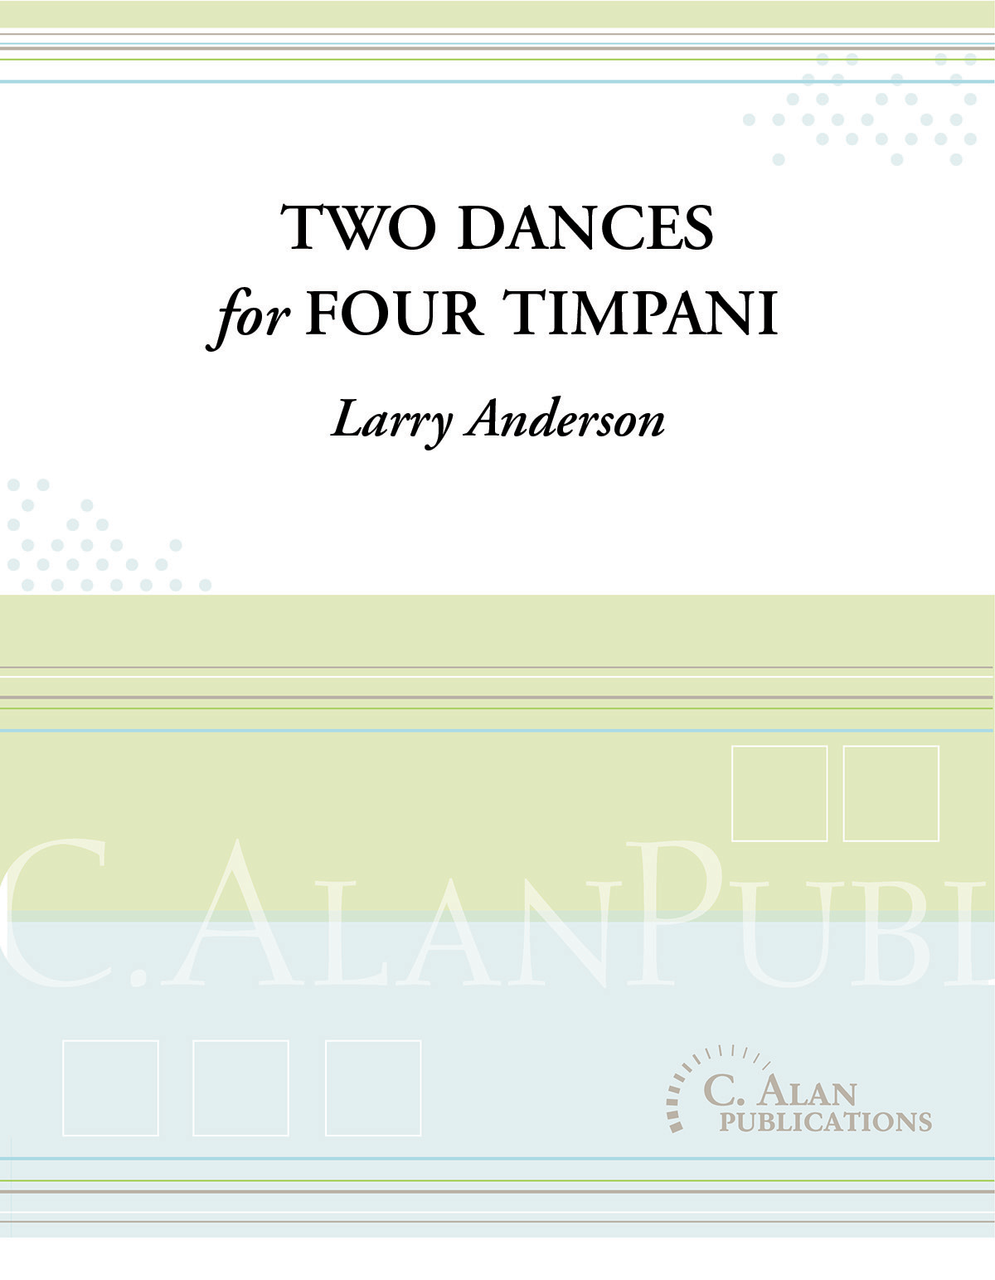 Two Dances for Four Timpani by Larry Anderson